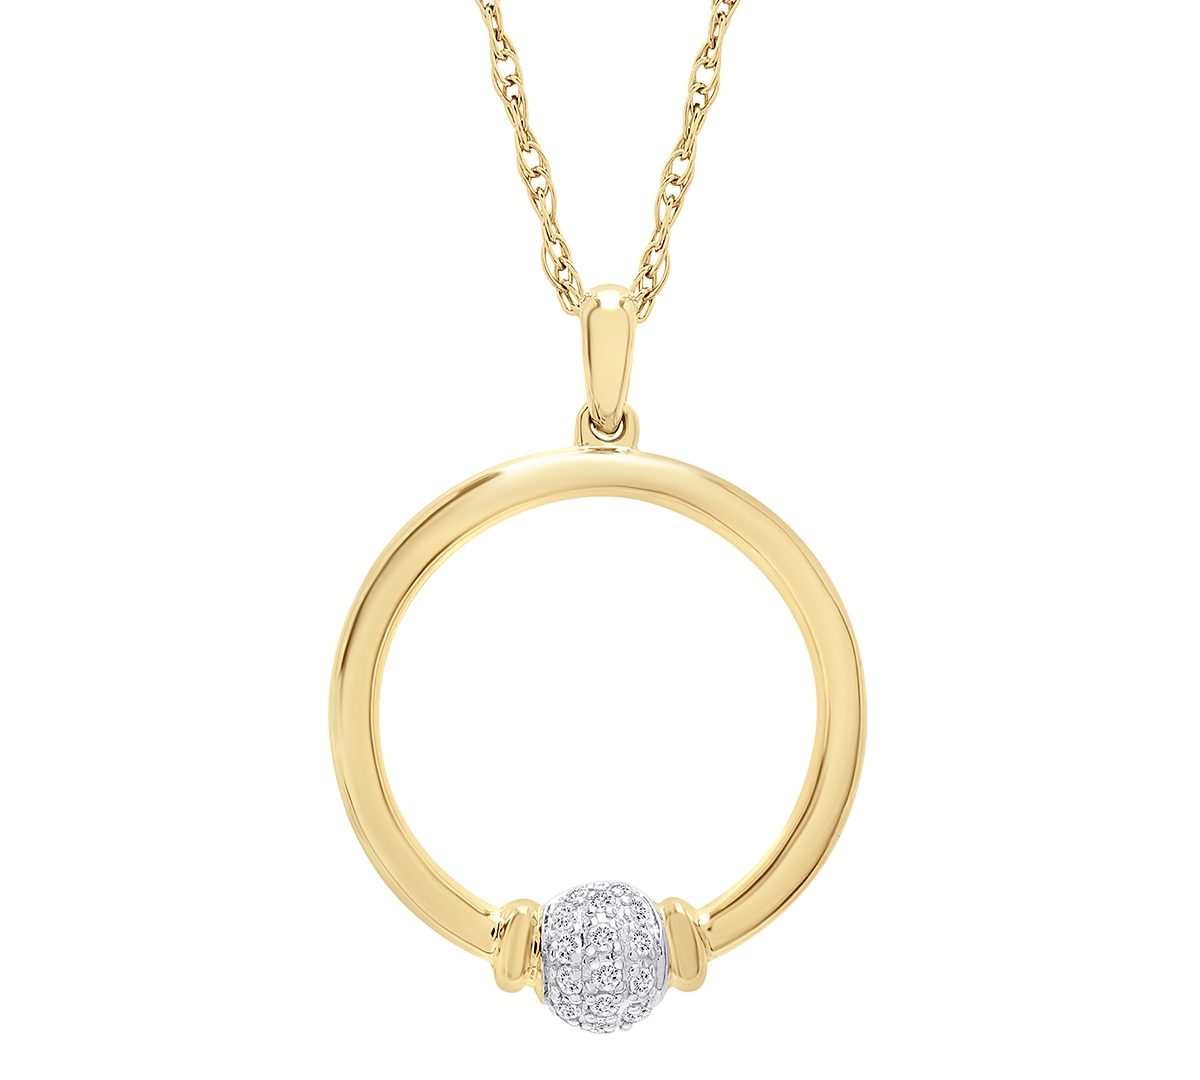 Diamond Circle Pendant Necklace (1/10 ct. t.w.) in 14k Gold, 18" + 2" extender, Created for Macy's - Yellow Gold